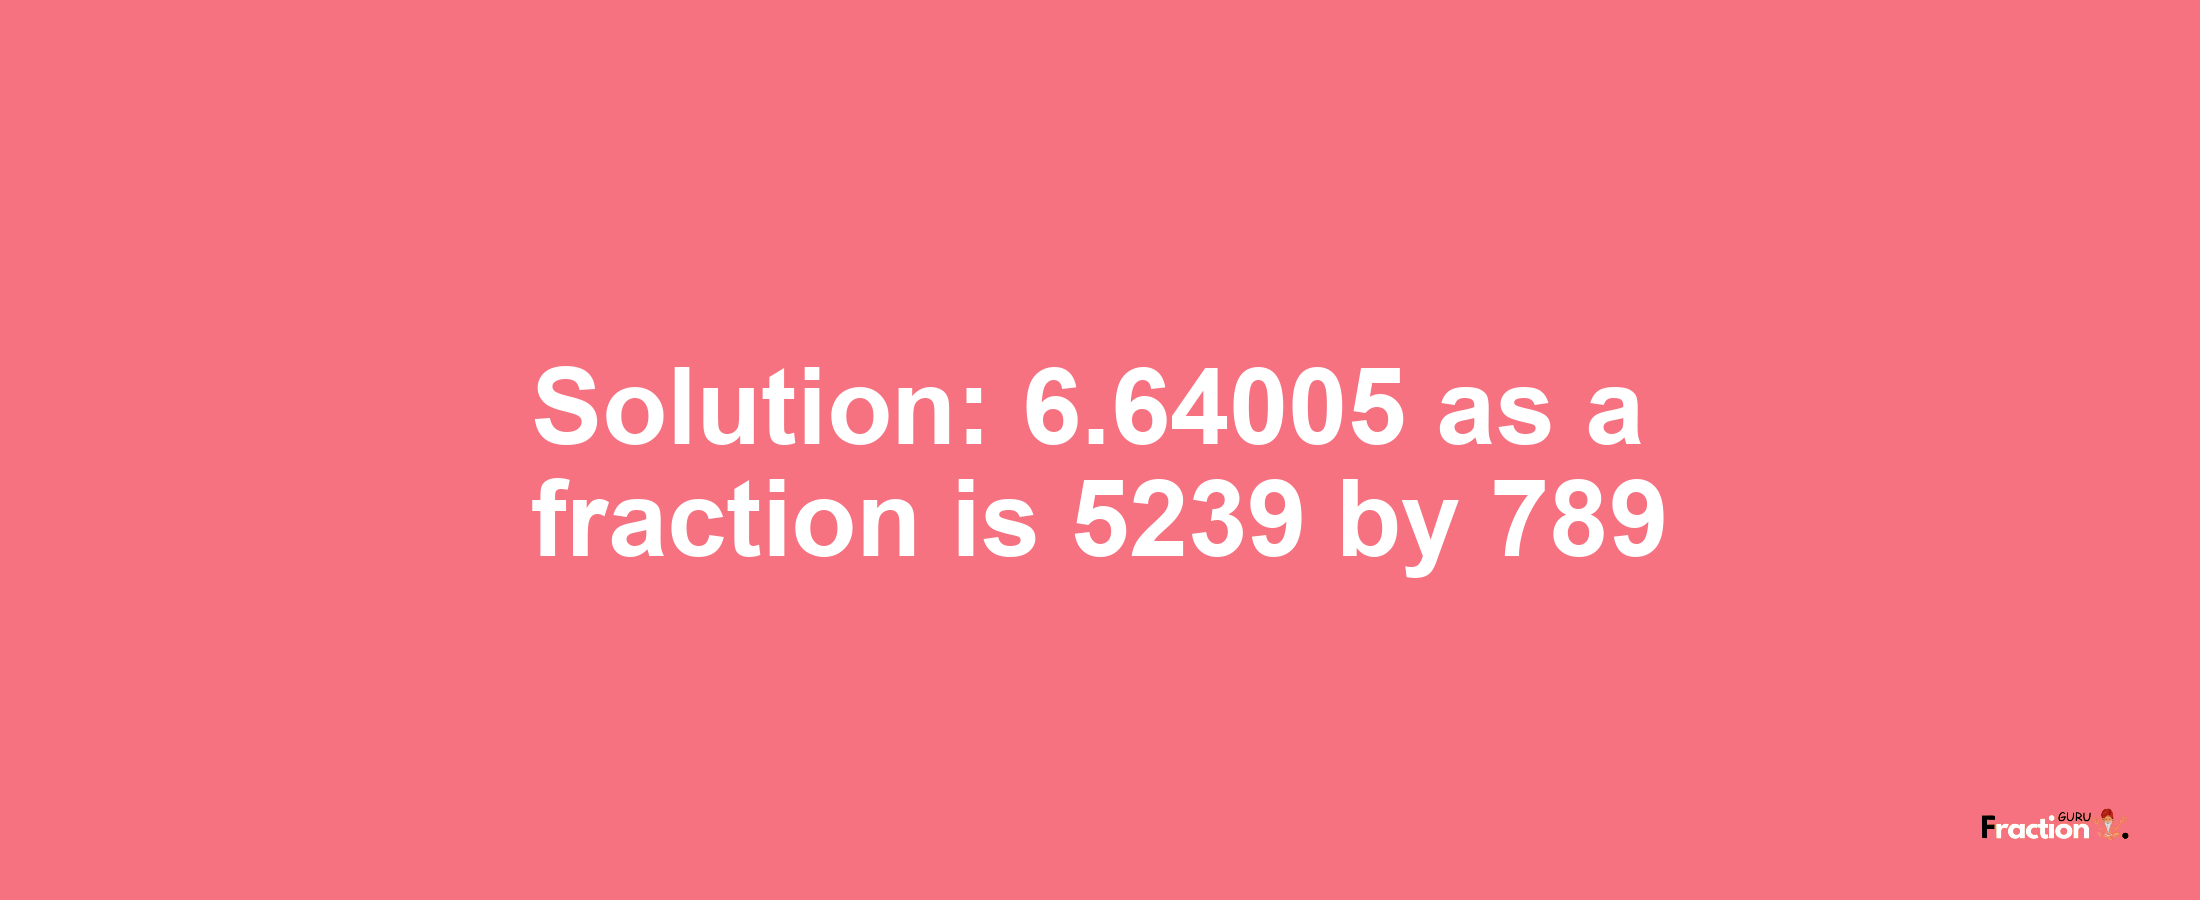 Solution:6.64005 as a fraction is 5239/789